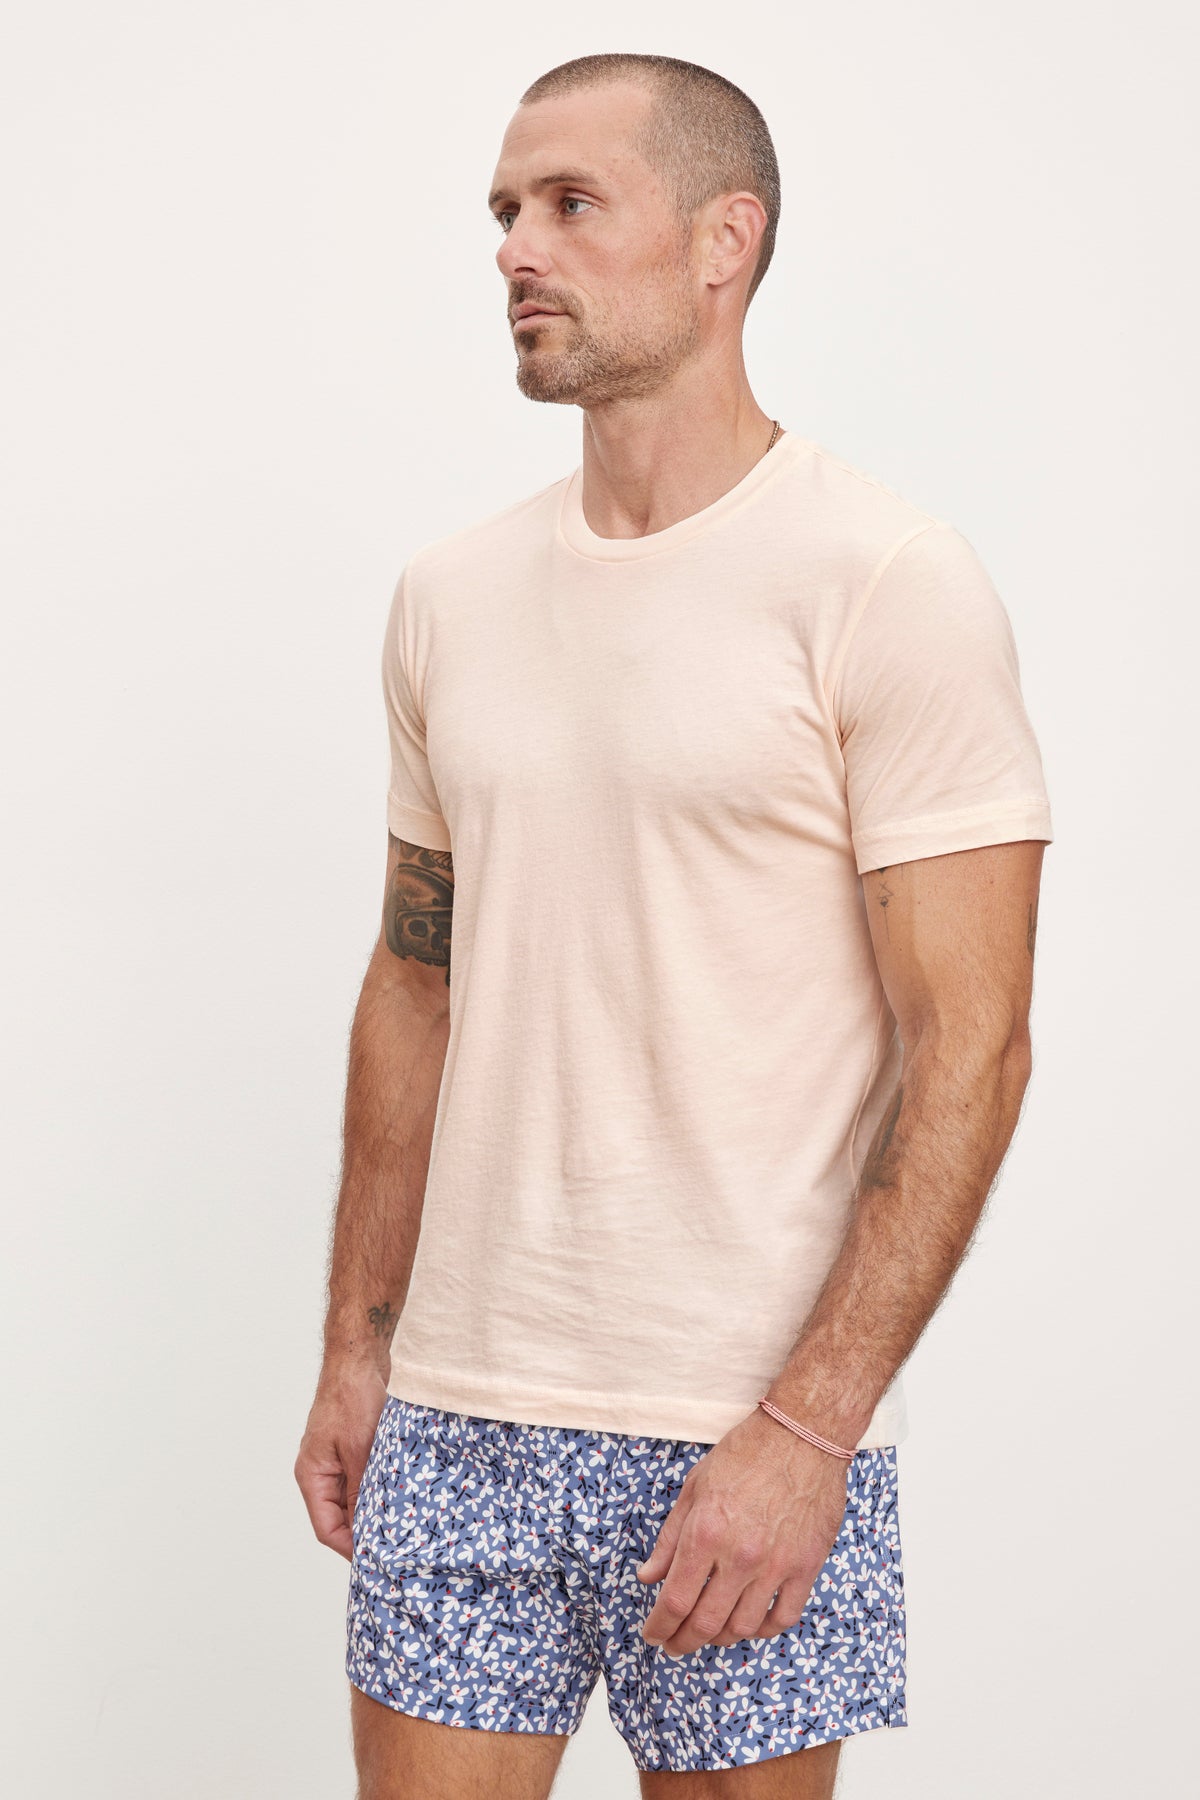   A man in a beige, 100% cotton Velvet by Graham & Spencer RANDY CREW NECK TEE and blue floral shorts standing against a white background, looking to his left. 